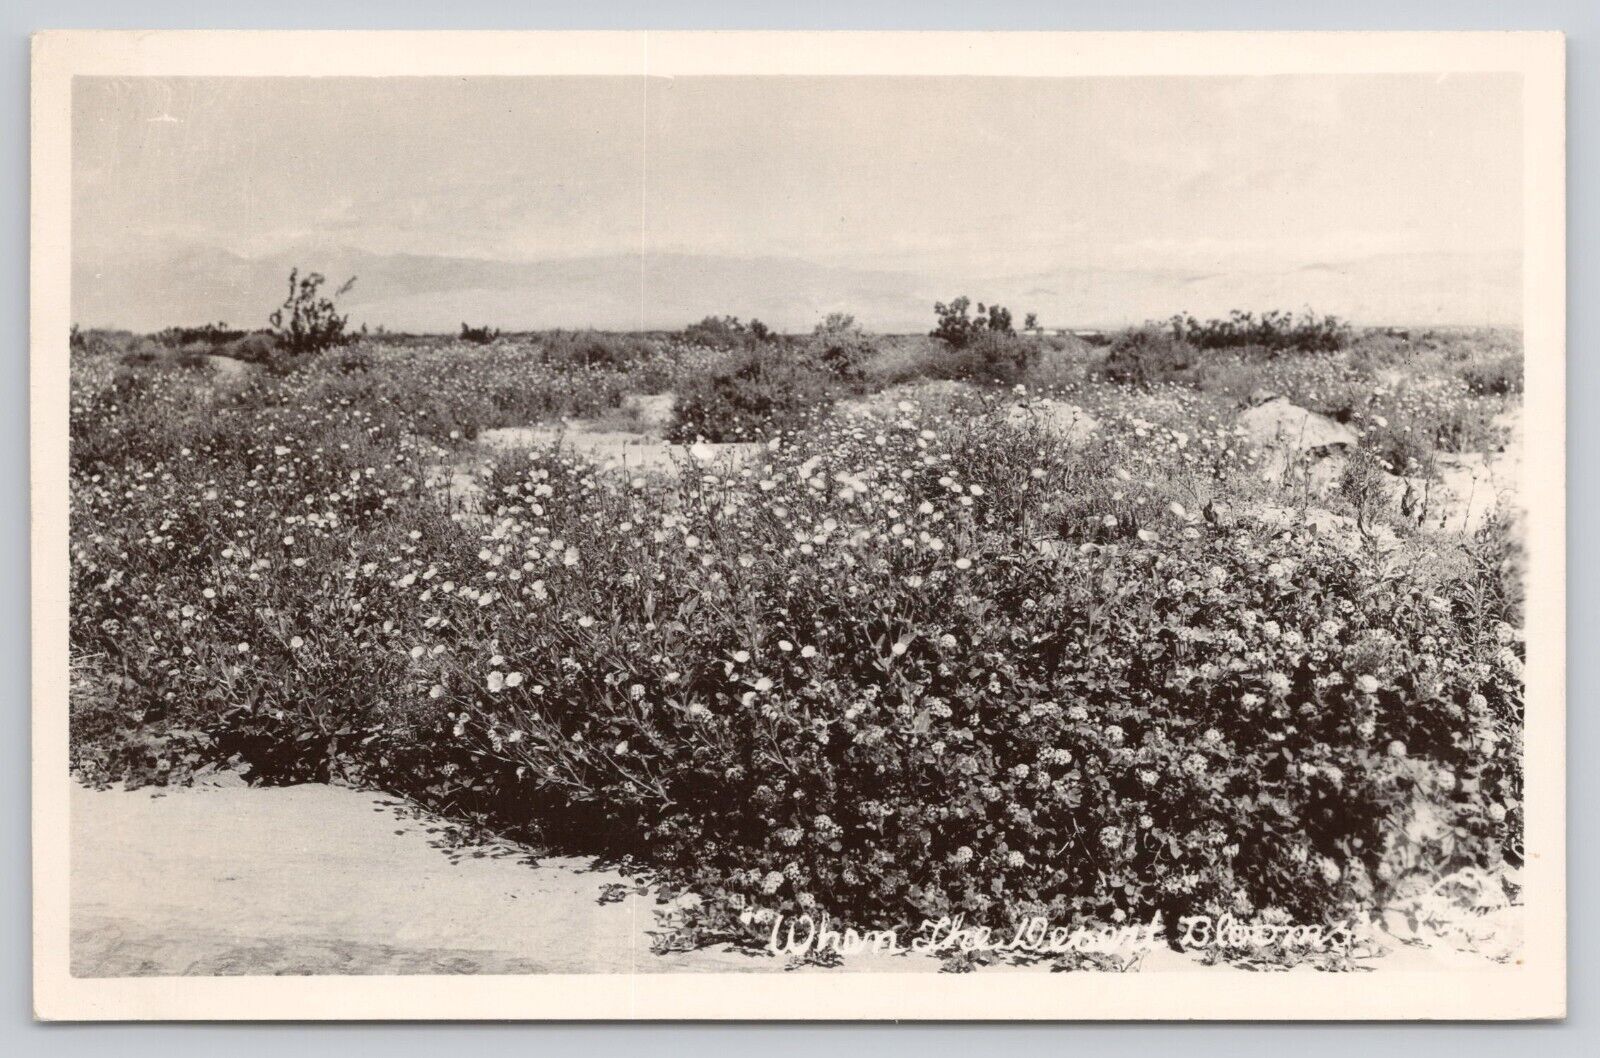 Desert Lilies Flowers Scenic Photos of the West Frashers Foto Card RPPC Postcard